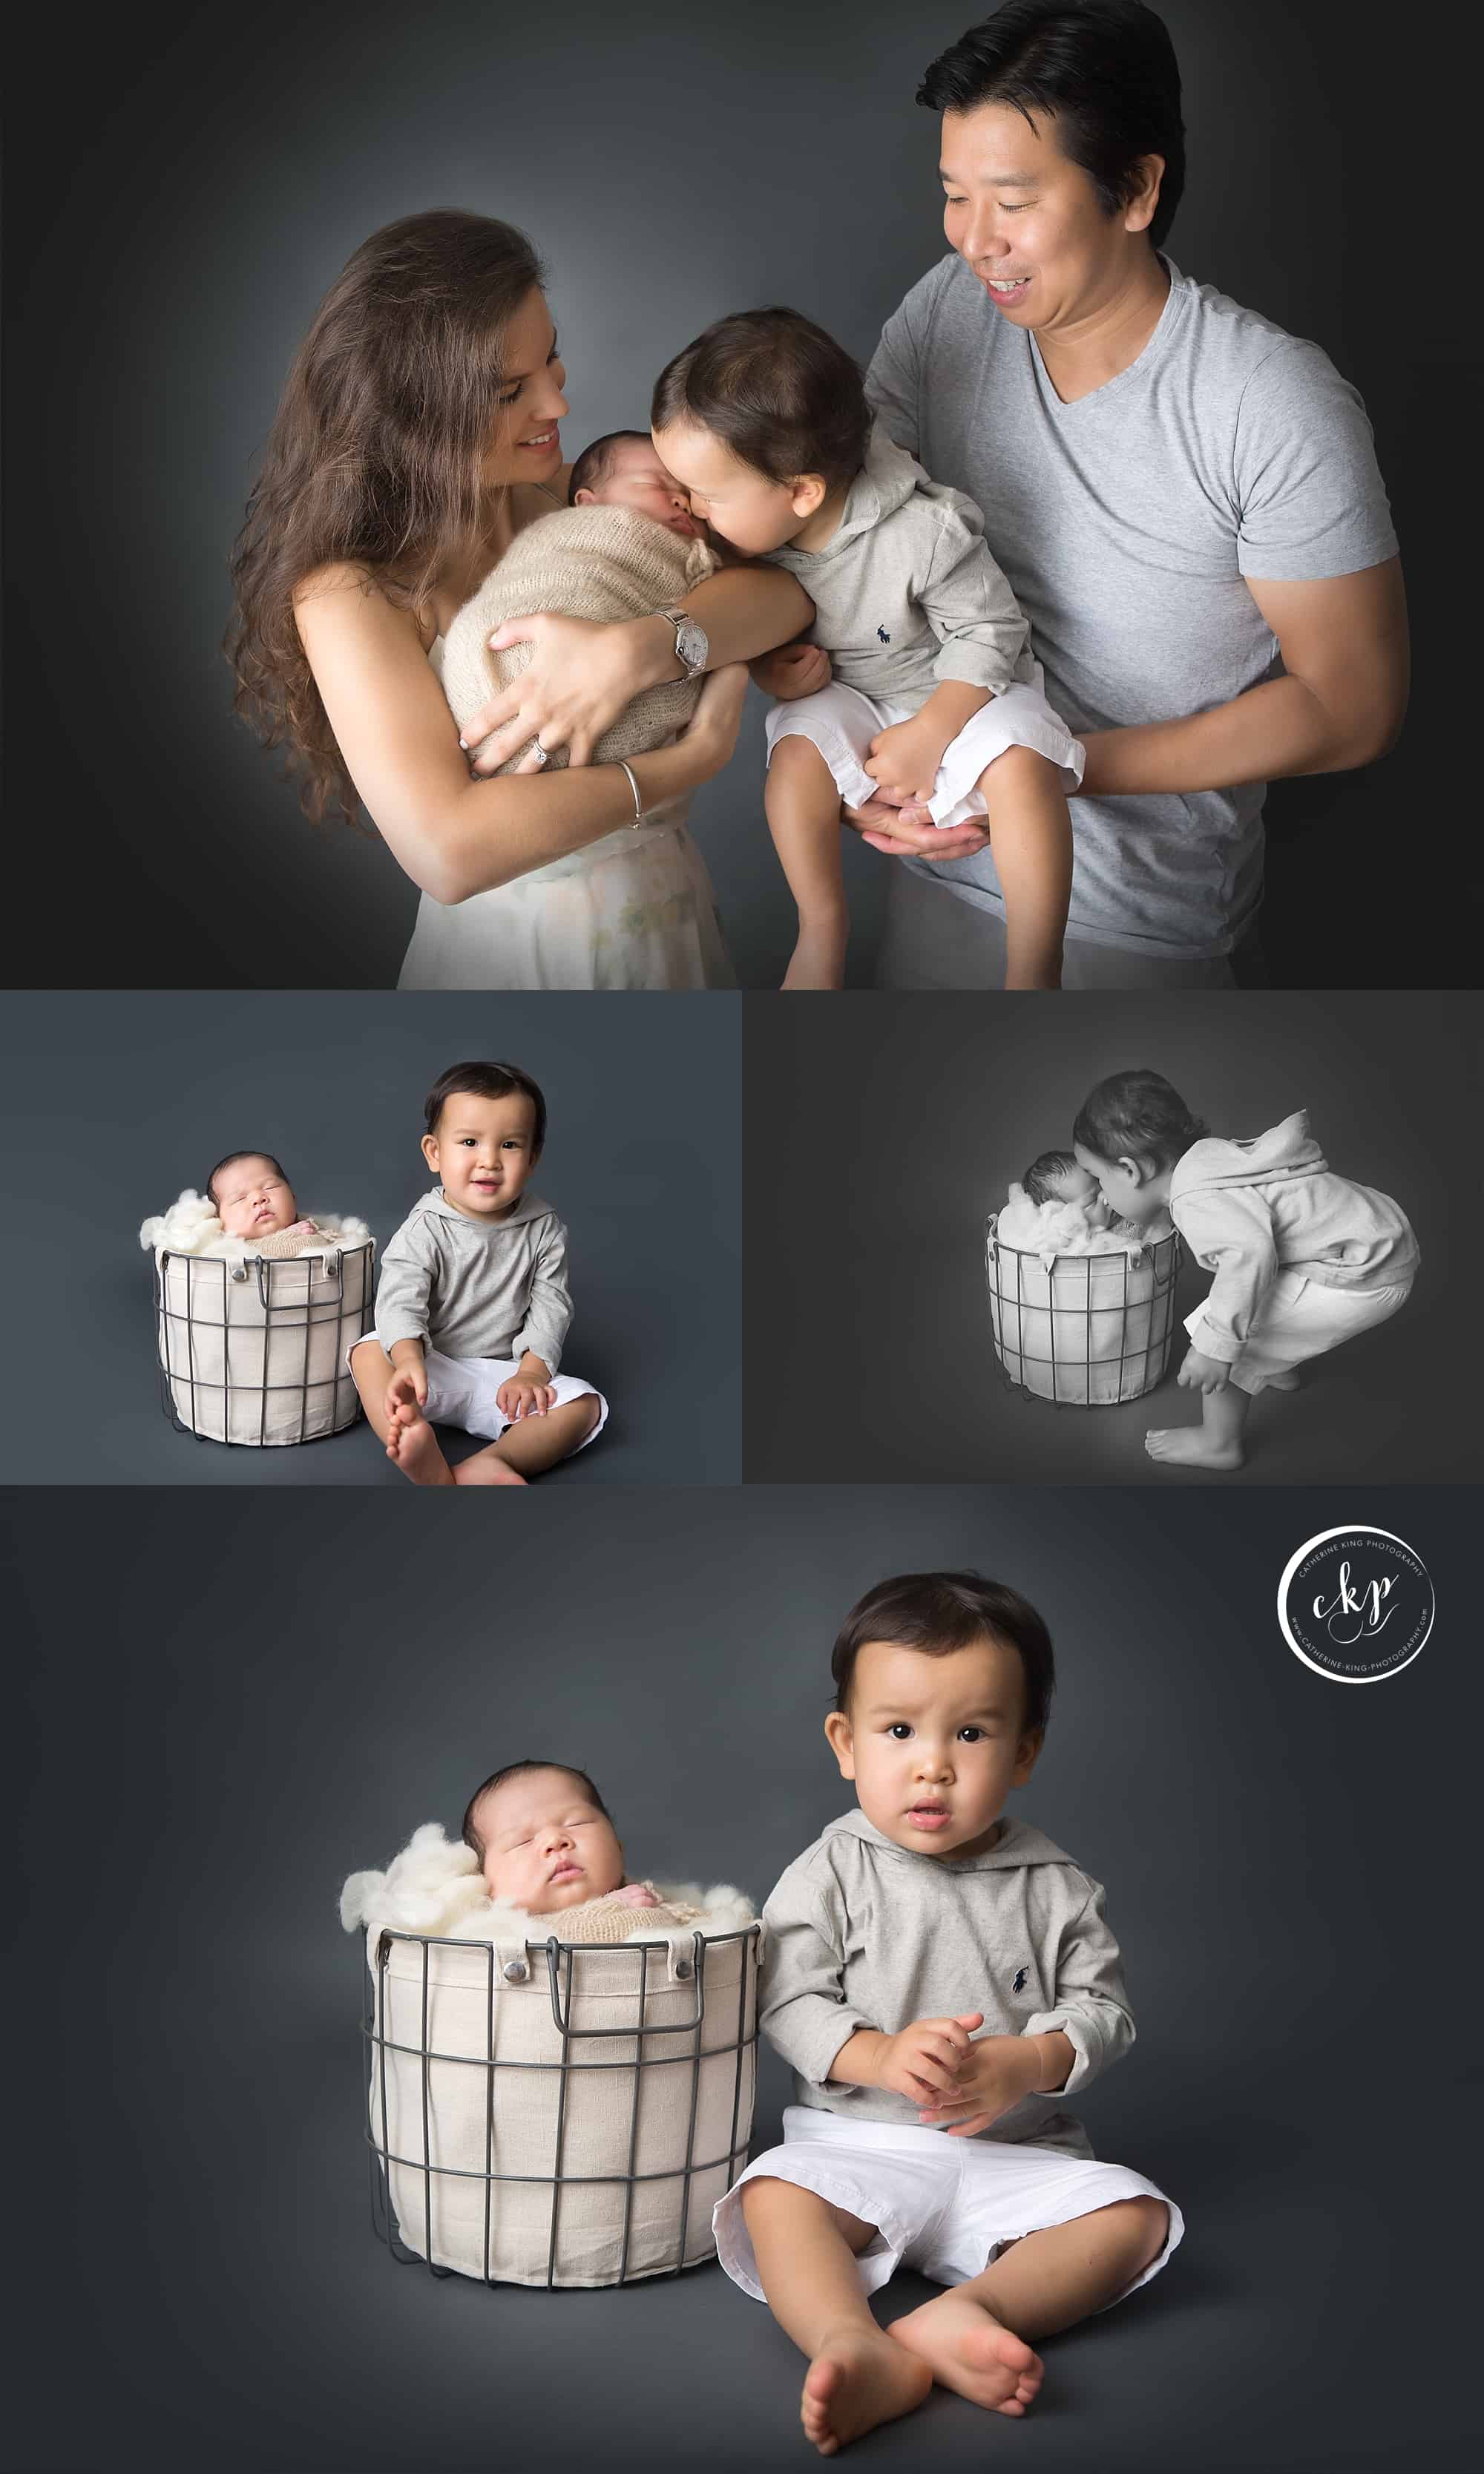 madison ct newborn photography session with Eva and her family